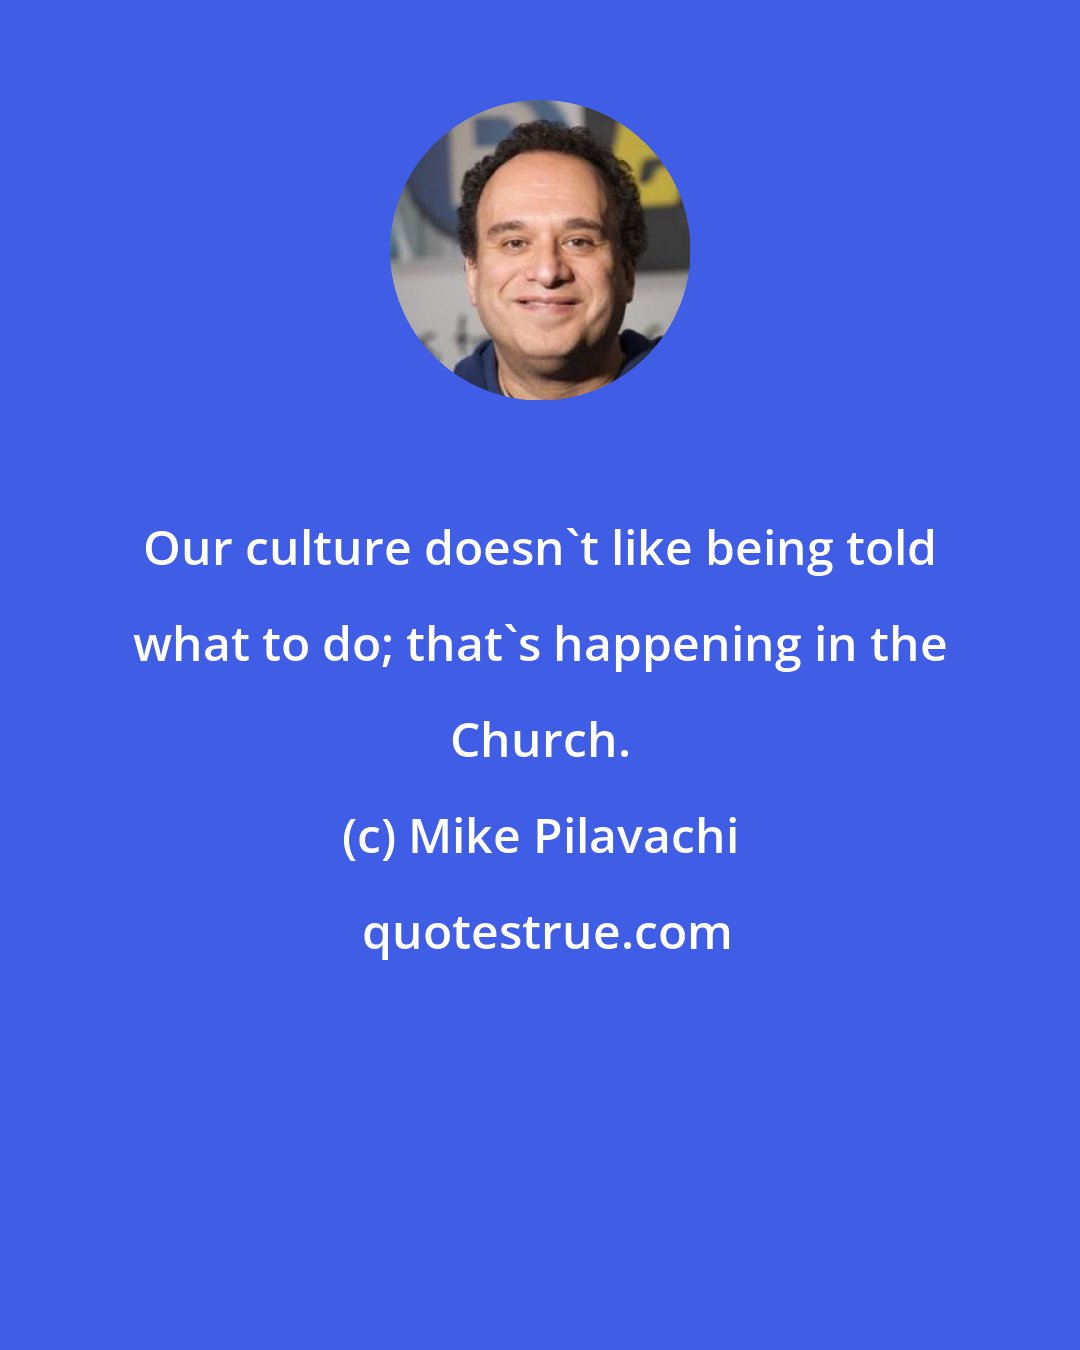 Mike Pilavachi: Our culture doesn't like being told what to do; that's happening in the Church.